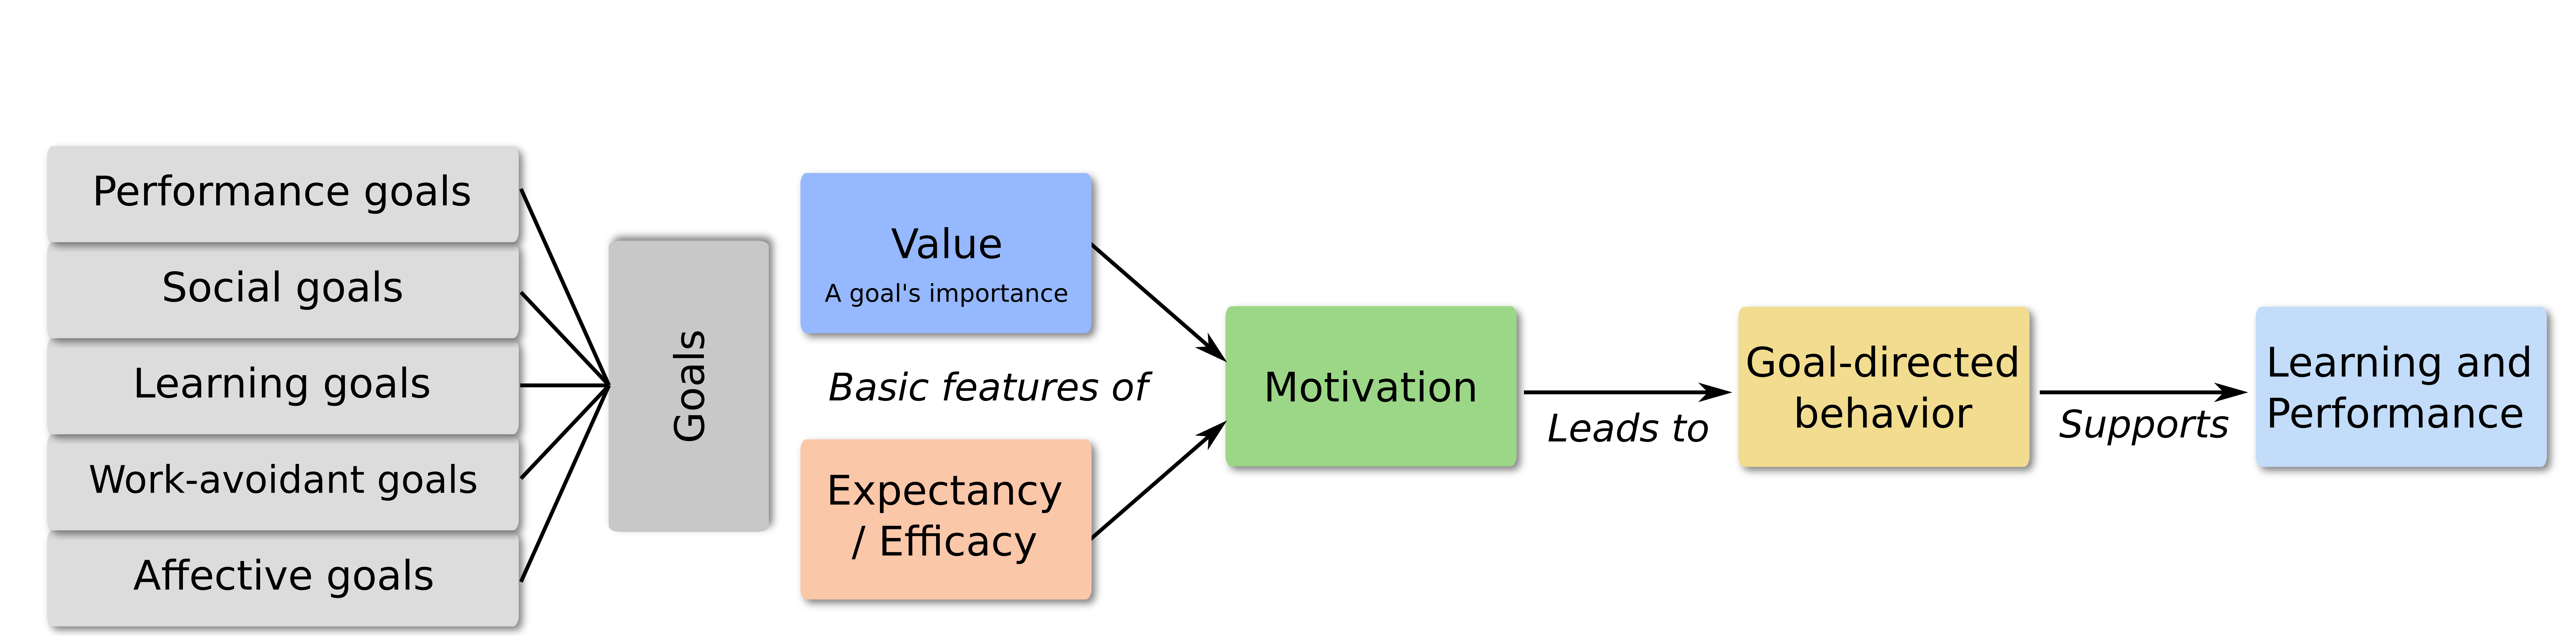 6 main boxes: a grey one with "Goals" written in it, a green one with "Motivation" in it, an blue one with "Value. A goal's importance" written in it, an orange one with "Expectancy / Efficacy" in it, a yellow one with "Goal-directed behavior" in it, a light blue with "Learning and Performance" written. 5 smaller boxes stacked on each other on the left of the "Goals" box with "Performance goals", "Social goals", "Learning goals", "Work-avoidant goals", "Affective goals" written inside. "Basic features of" written between "Goals" and "Motivation". 2 arrows from "Value" and "Expectancy" to "Motivation". 1 arrow  from "Motivation" to "Goal-directed behavior" with "Leads to" written below. 1 arrow from "Goal-directed behavior" to "Learning and Performance" with "Supports" written below. 